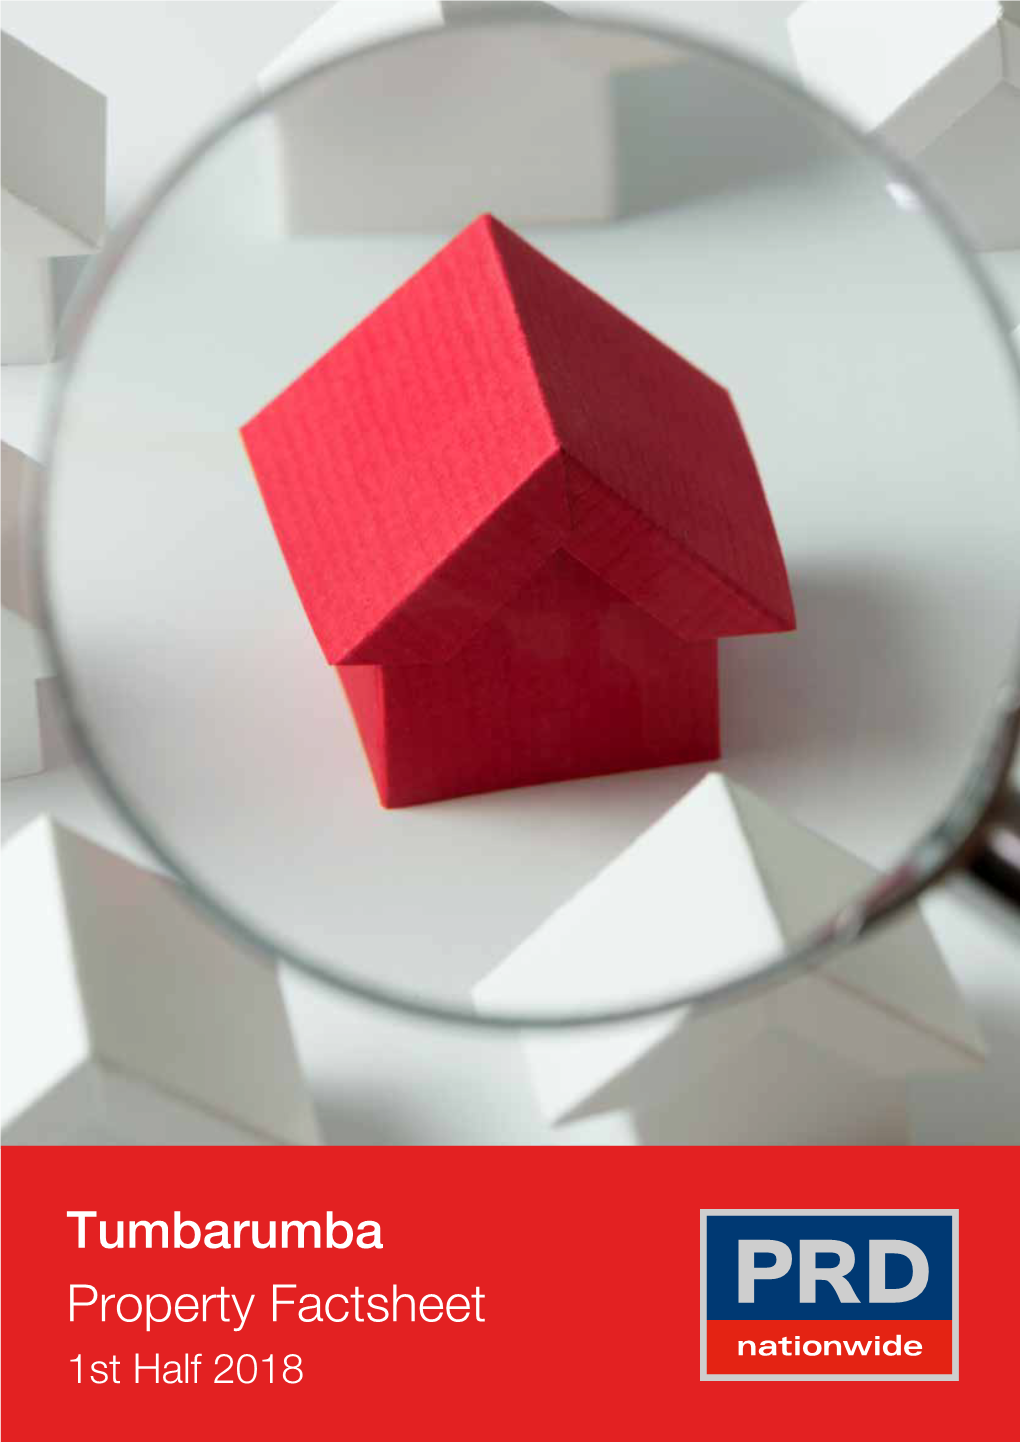 Tumbarumba Property Factsheet 1St Half 2018 OVERVIEW Tumbarumba Is a Small Town Located on the Western Side of the Snowy Mountains in New South Wales